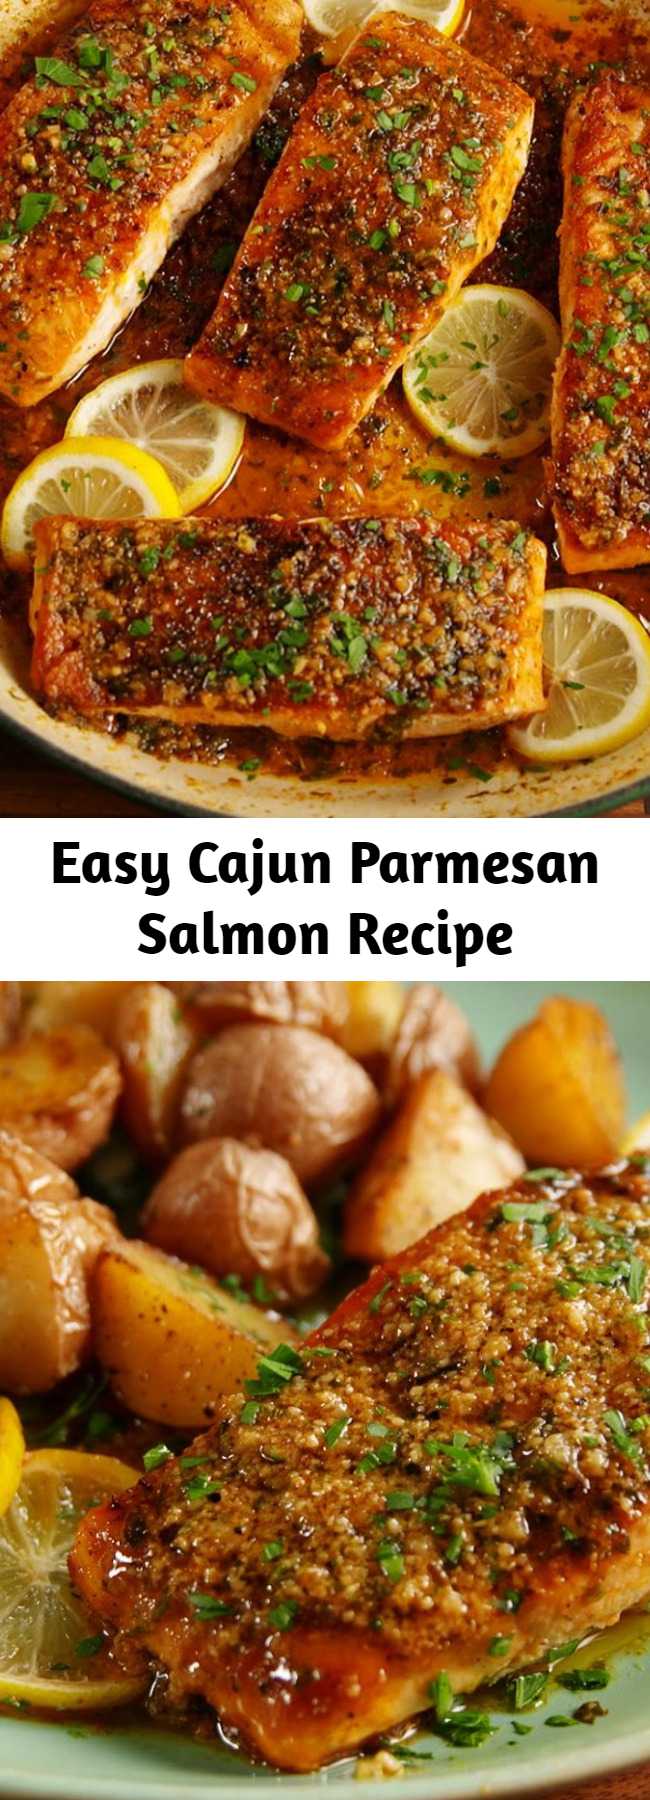 Easy Cajun Parmesan Salmon Recipe - This salmon has a simple sauce that's made right in the pan. A little kick from the cajun seasoning and a little sweet from the honey it's the perfect combo. Serve it alongside some roasted potatoes and extra Parmesan! #recipes #easyrecipes #healthyrecipes #salmon #dinner